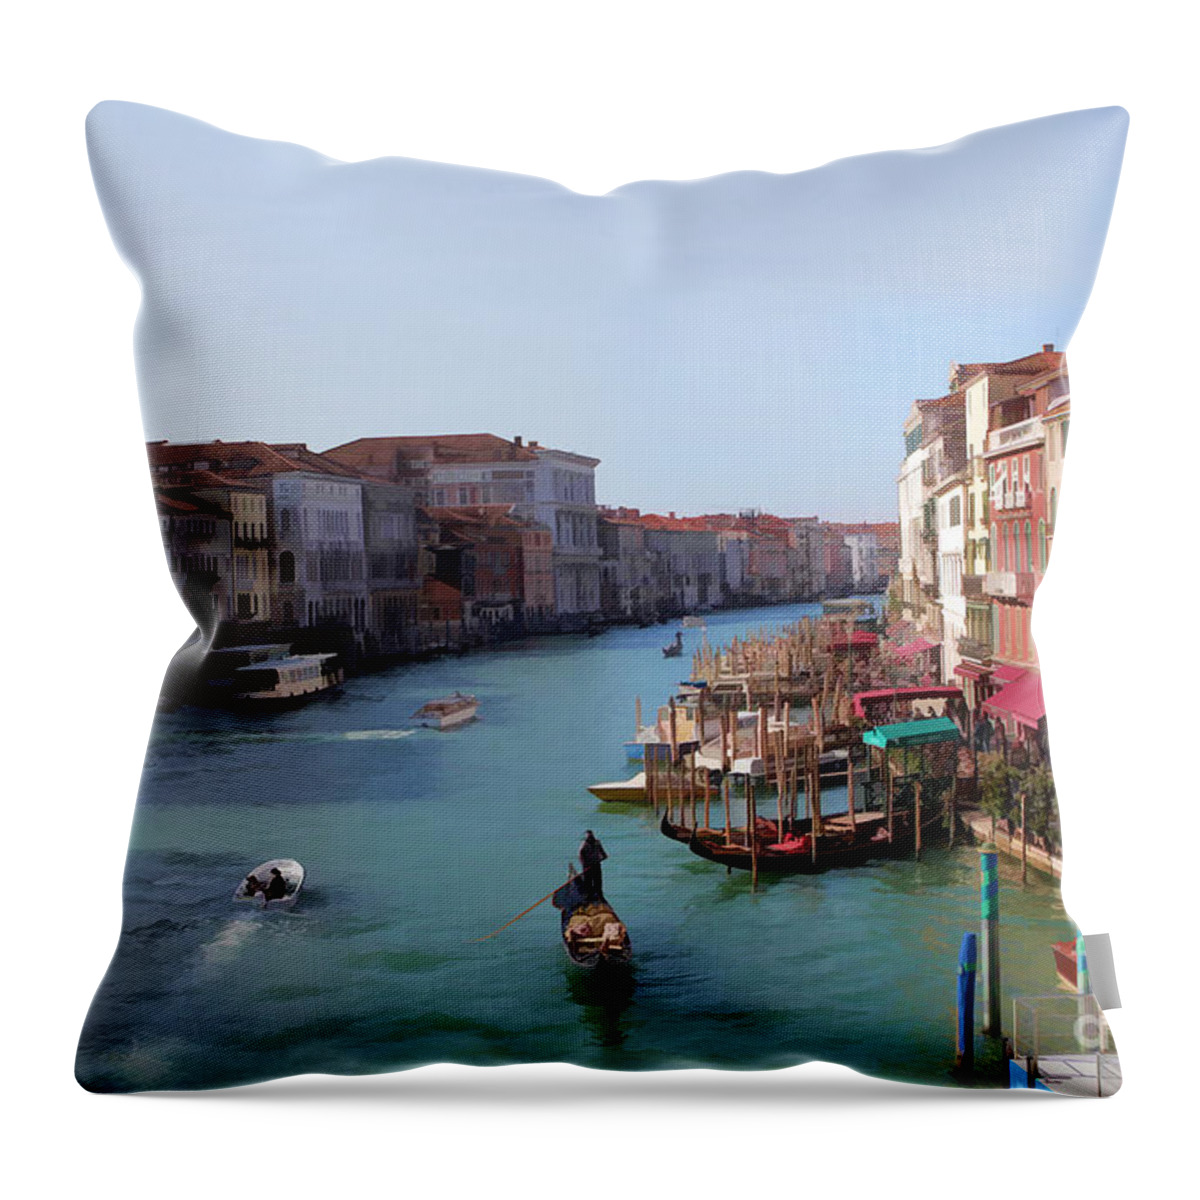 Venice Image Throw Pillow featuring the photograph The Grand Canal Venice Oil Effect by Tom Prendergast